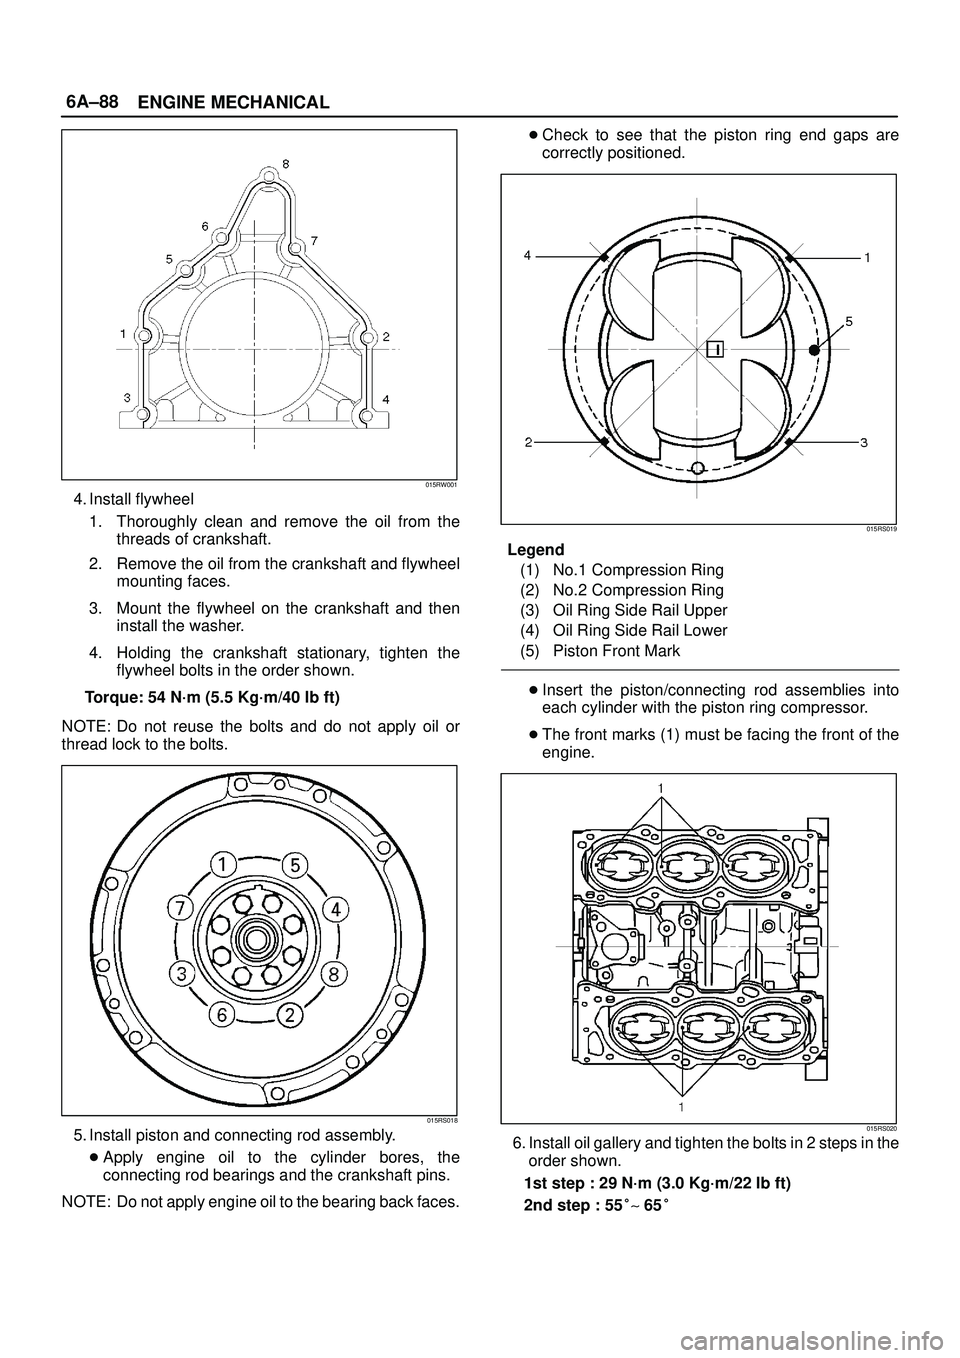 ISUZU TROOPER 1998  Service Service Manual 6A±88
ENGINE MECHANICAL
015RW001
4. Install flywheel
1. Thoroughly clean and remove the oil from the
threads of crankshaft.
2. Remove the oil from the crankshaft and flywheel
mounting faces.
3. Mount